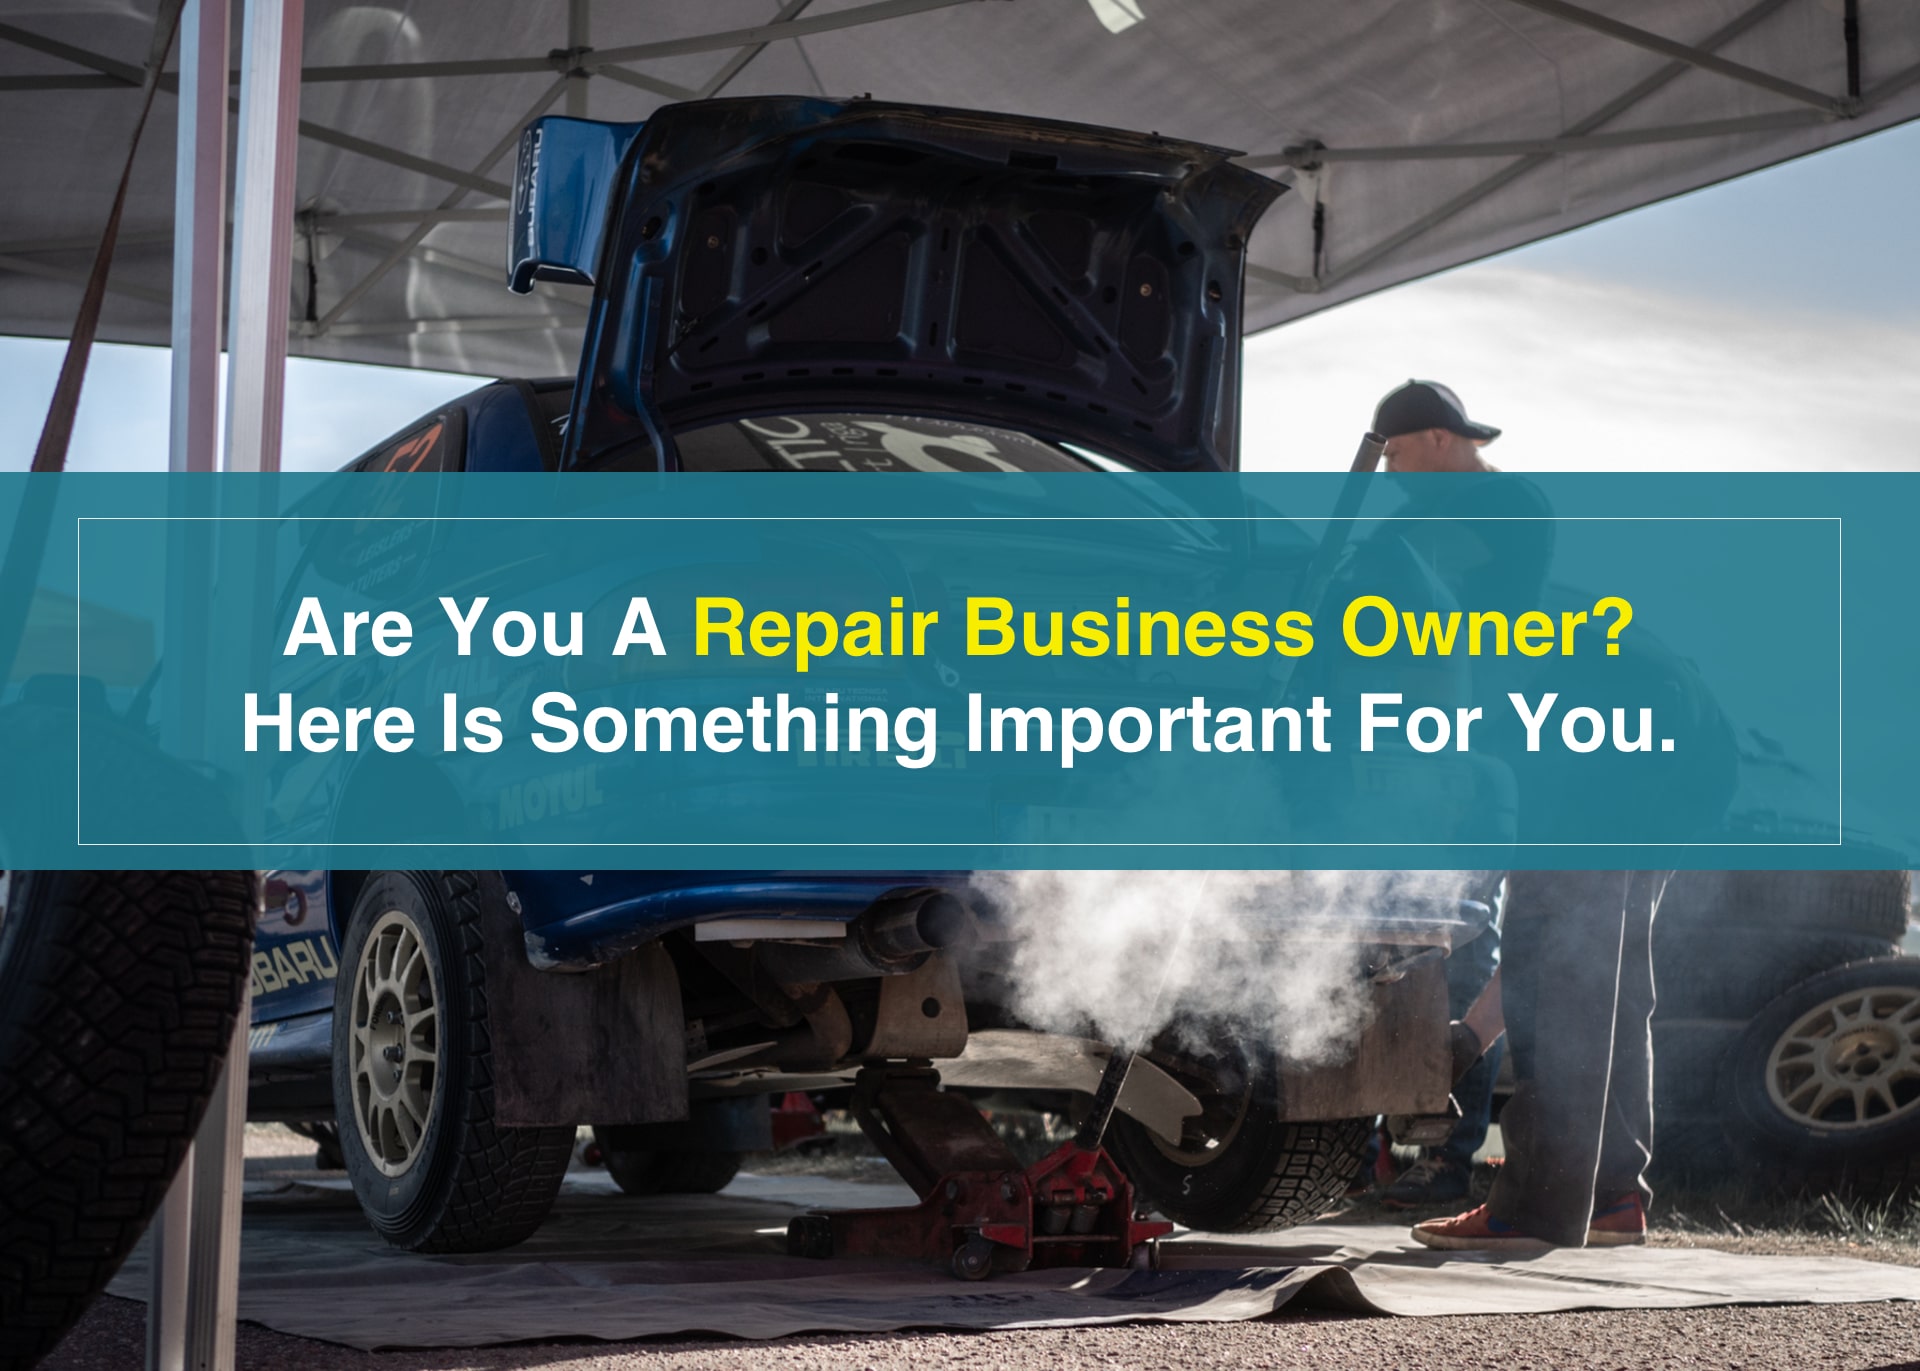 4 things that every repair business-owner should keep in mind